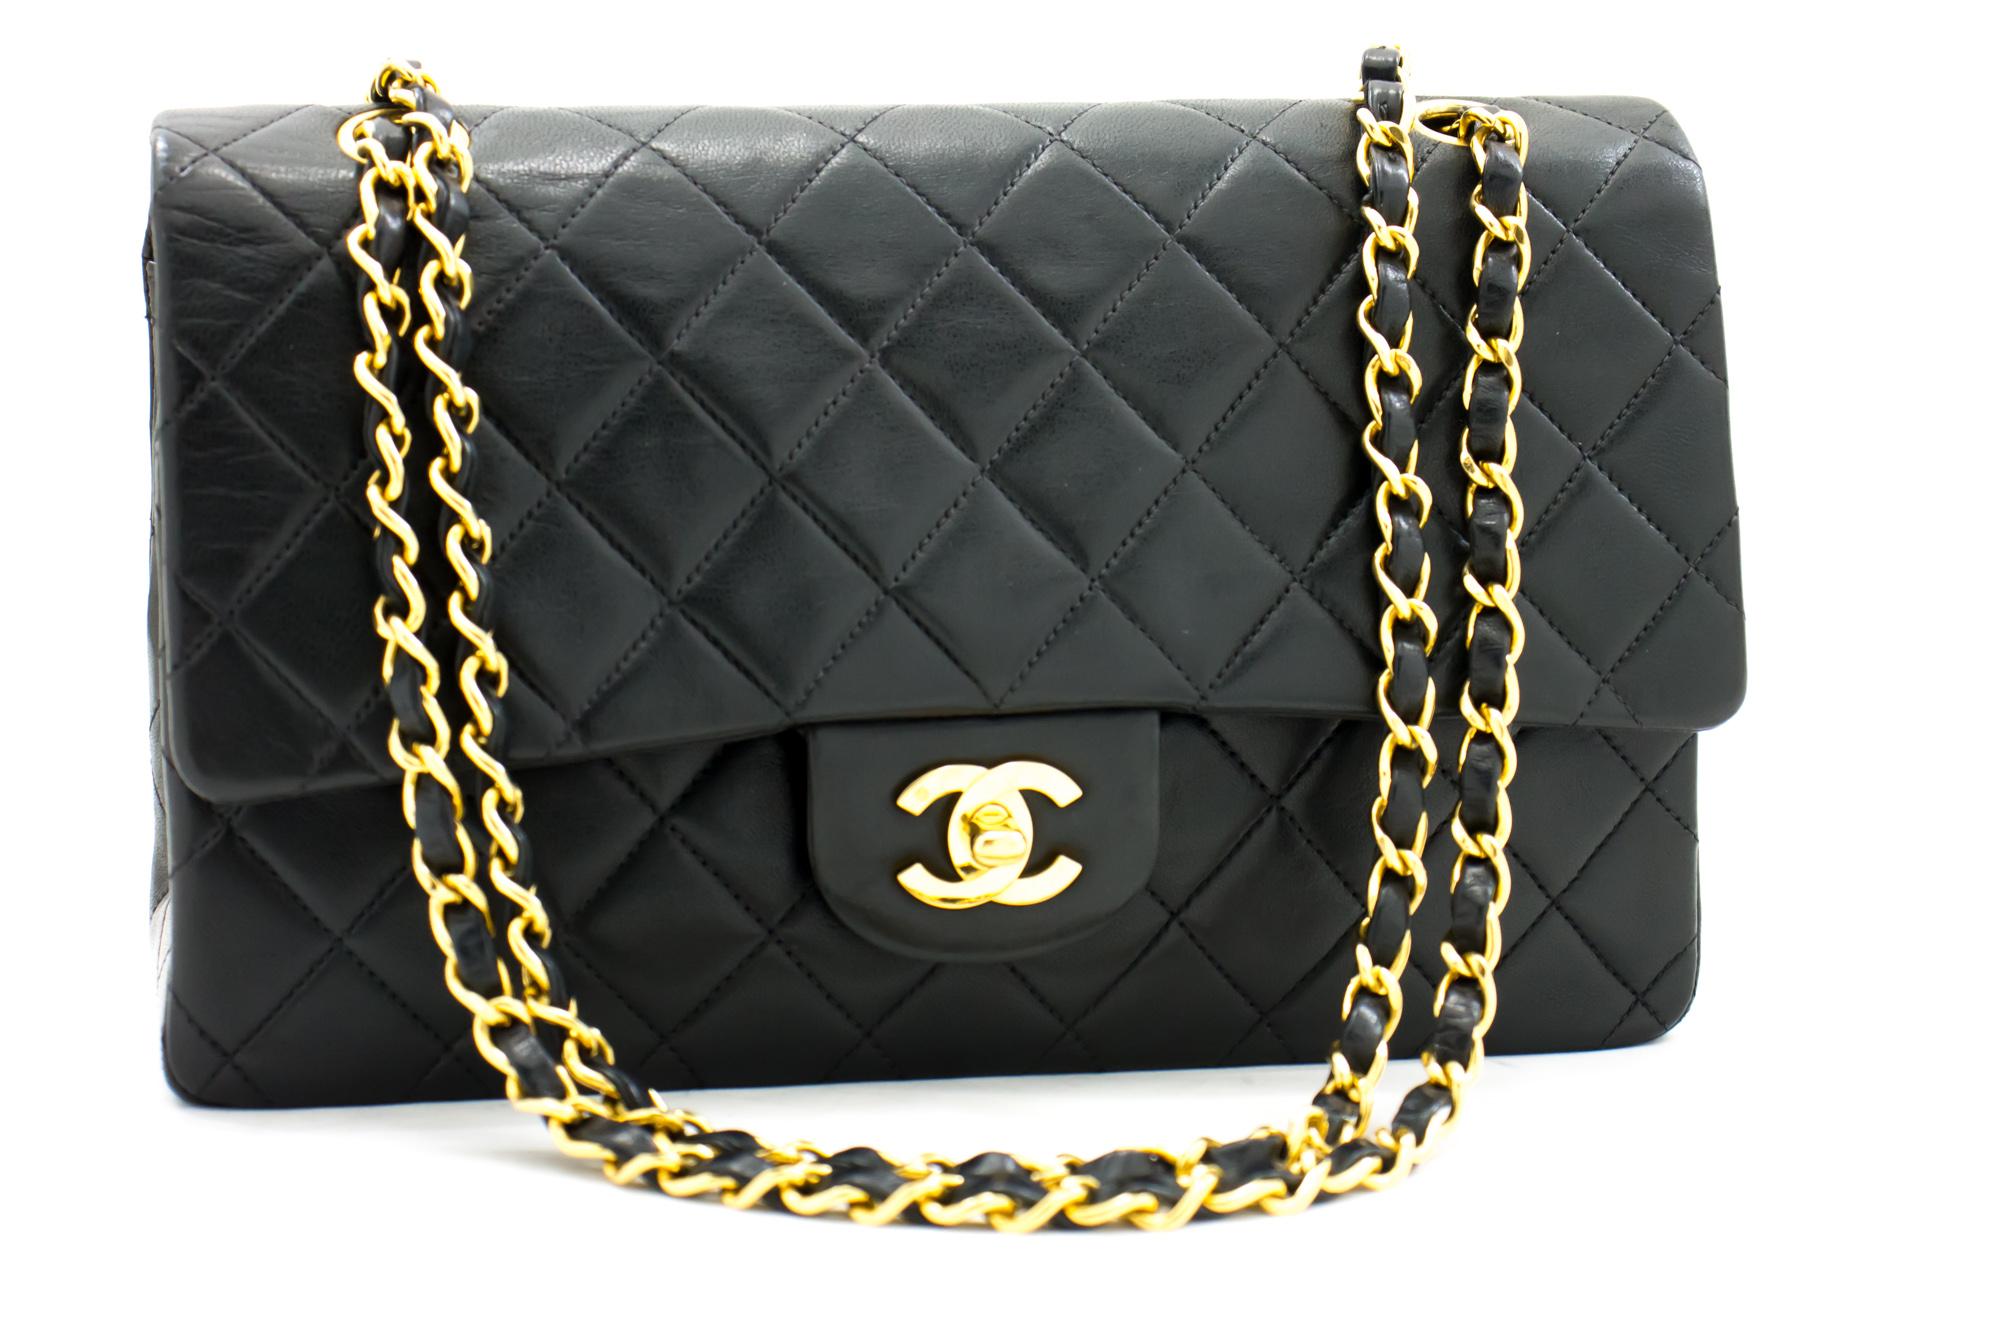 An authentic CHANEL 2.55 Classic Double Flap Medium Chain Shoulder Bag Black made of black Lambskin. The color is Black. The outside material is Leather. The pattern is Solid. This item is Contemporary. The year of manufacture would be